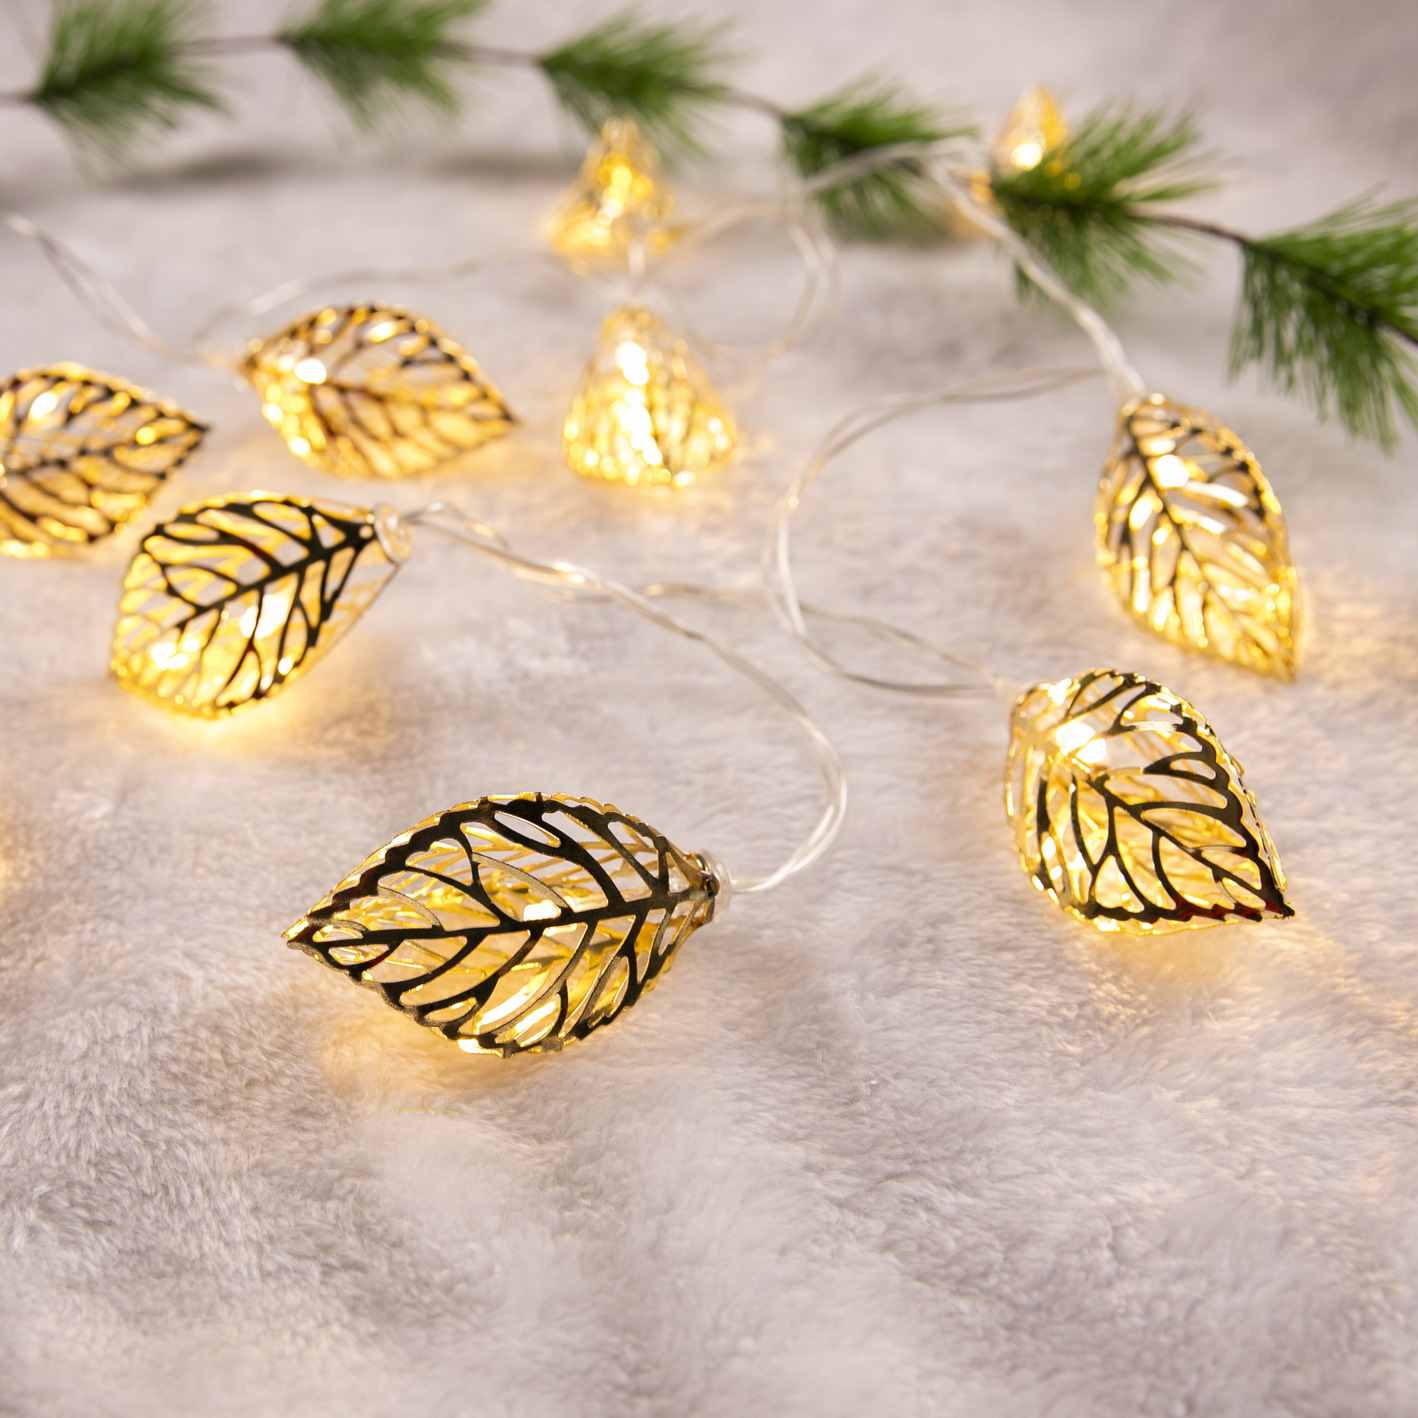 Cheap price Indoor String Fairy Lights -
 China Customized Metal Golden Leaf Christmas Fairy String Light For Holiday Decoration | ZHONGXIN – Zhongxin